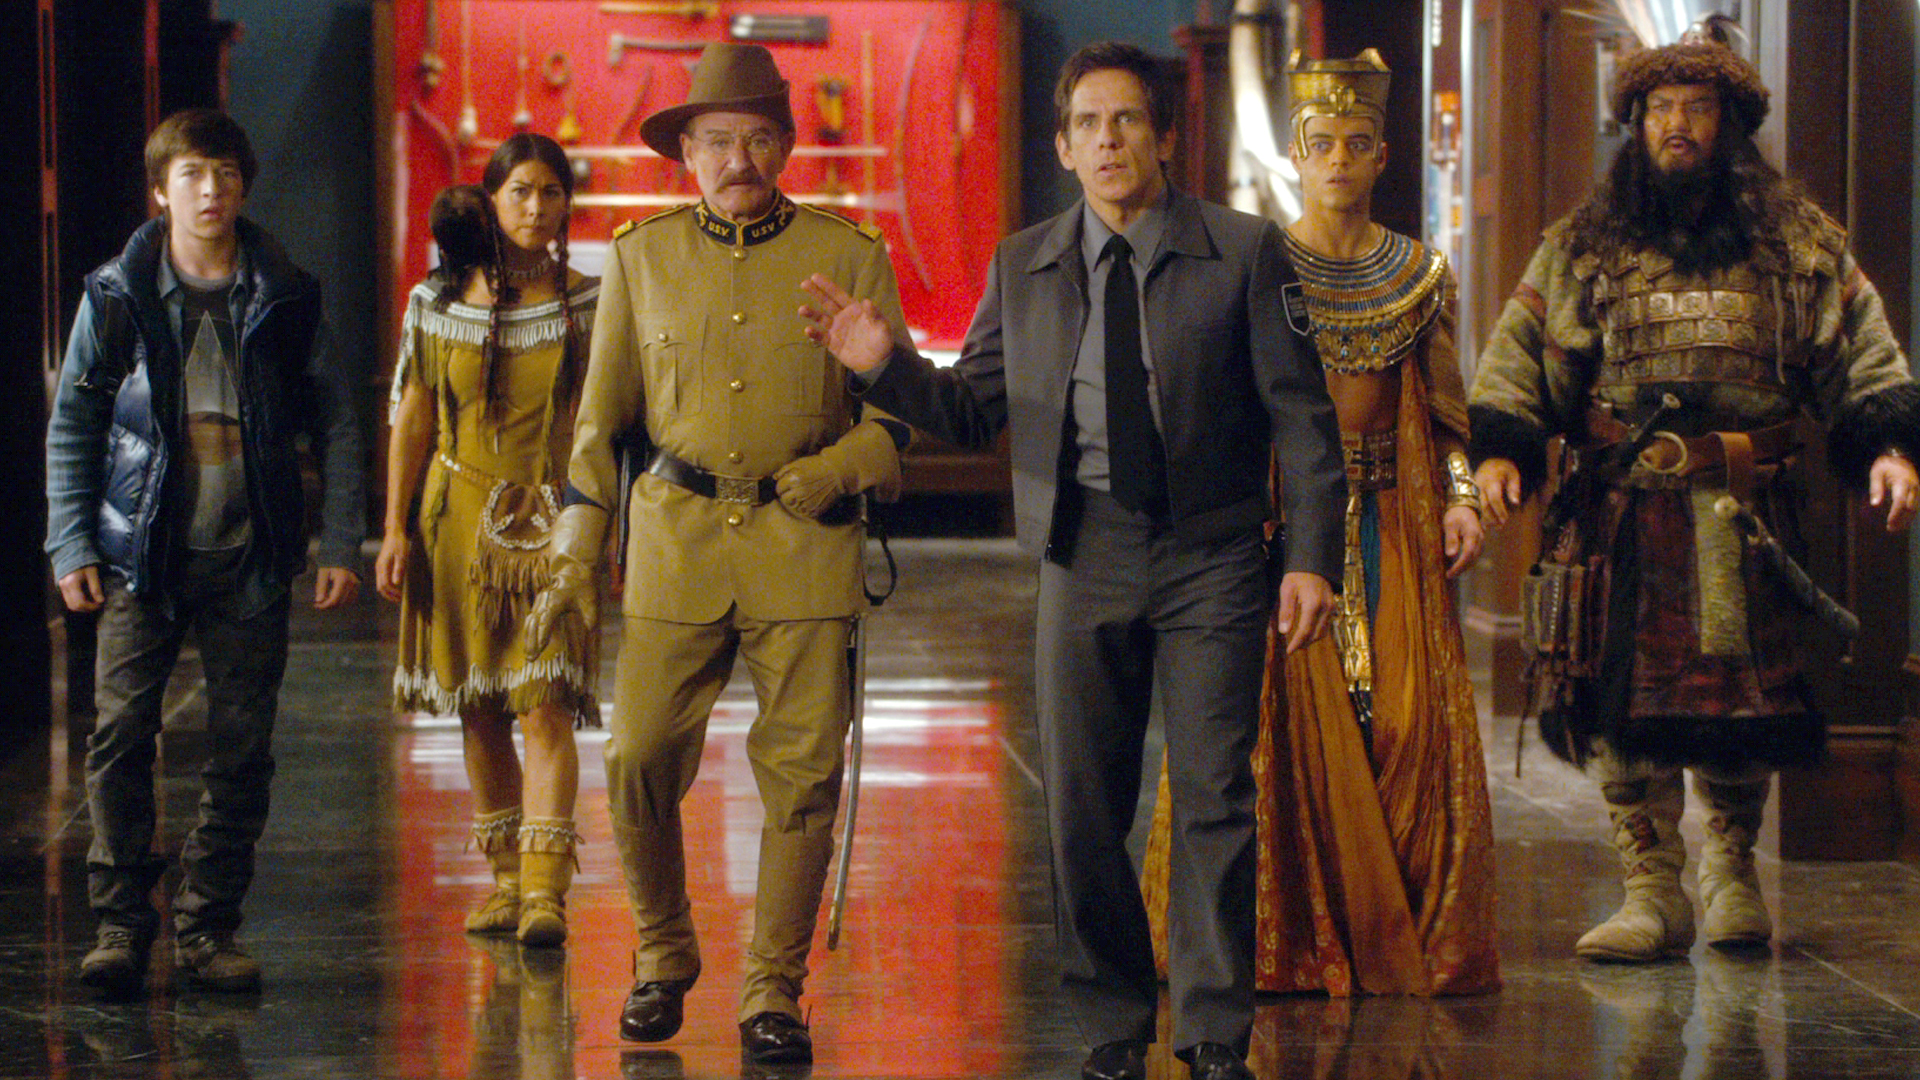 Night at the Museum: Secret of the Tomb (2014) | Fandango